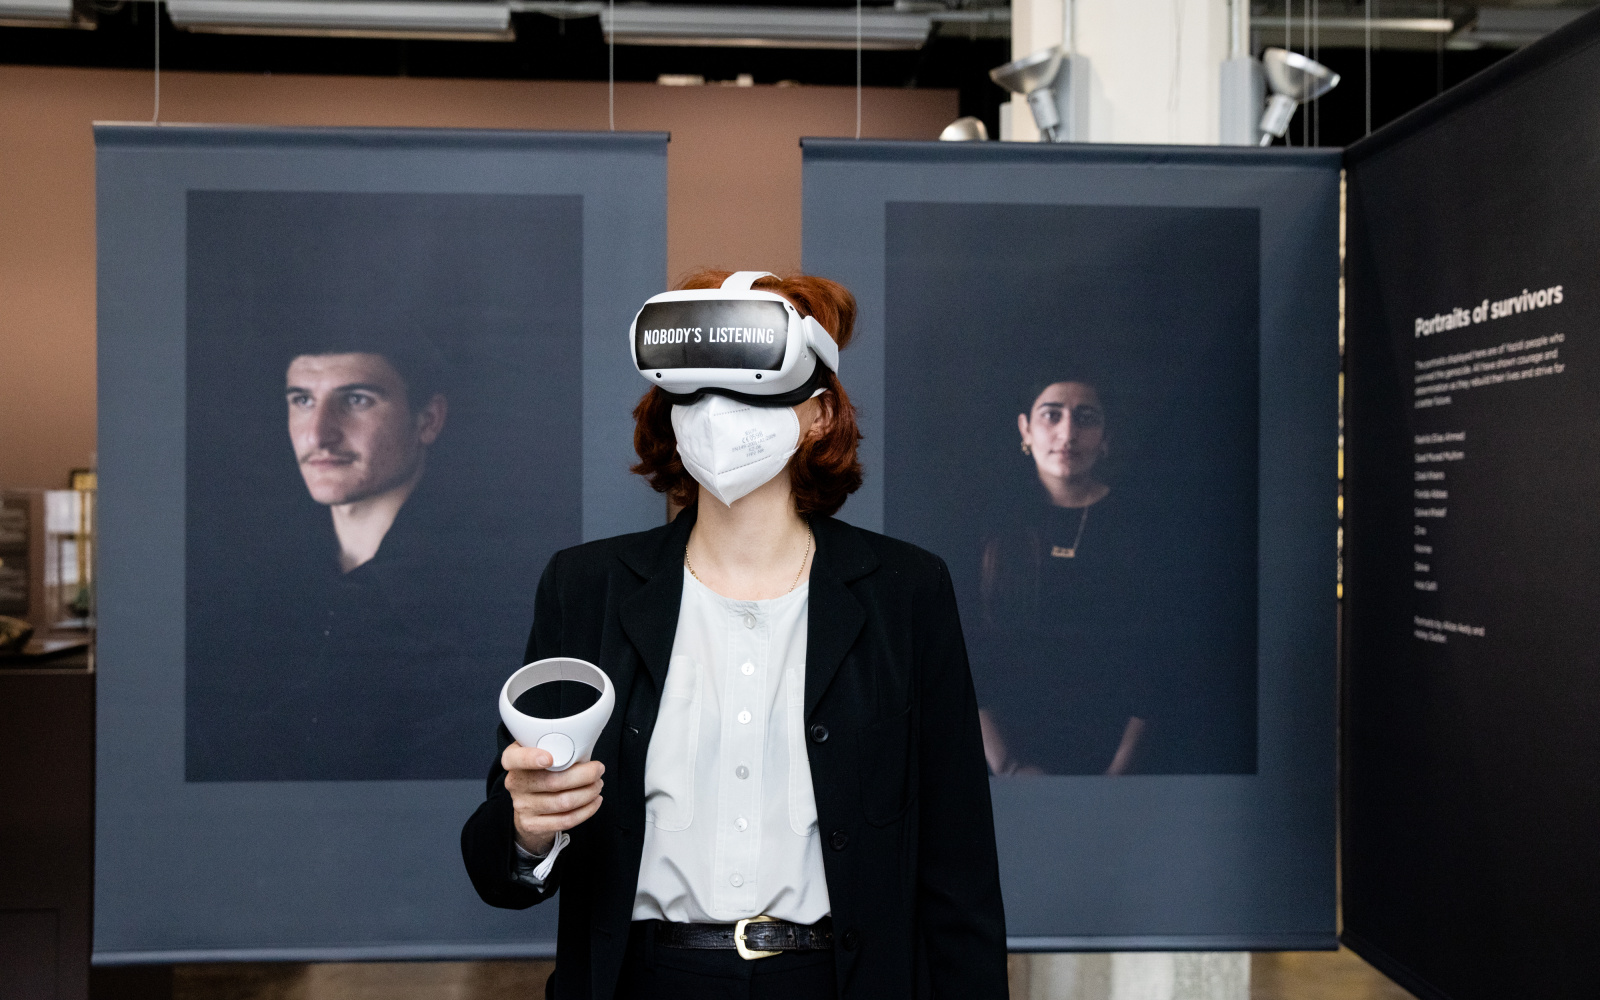 Co-curator Teresa Retzer can be seen standing in the exhibition space wearing VR glasses